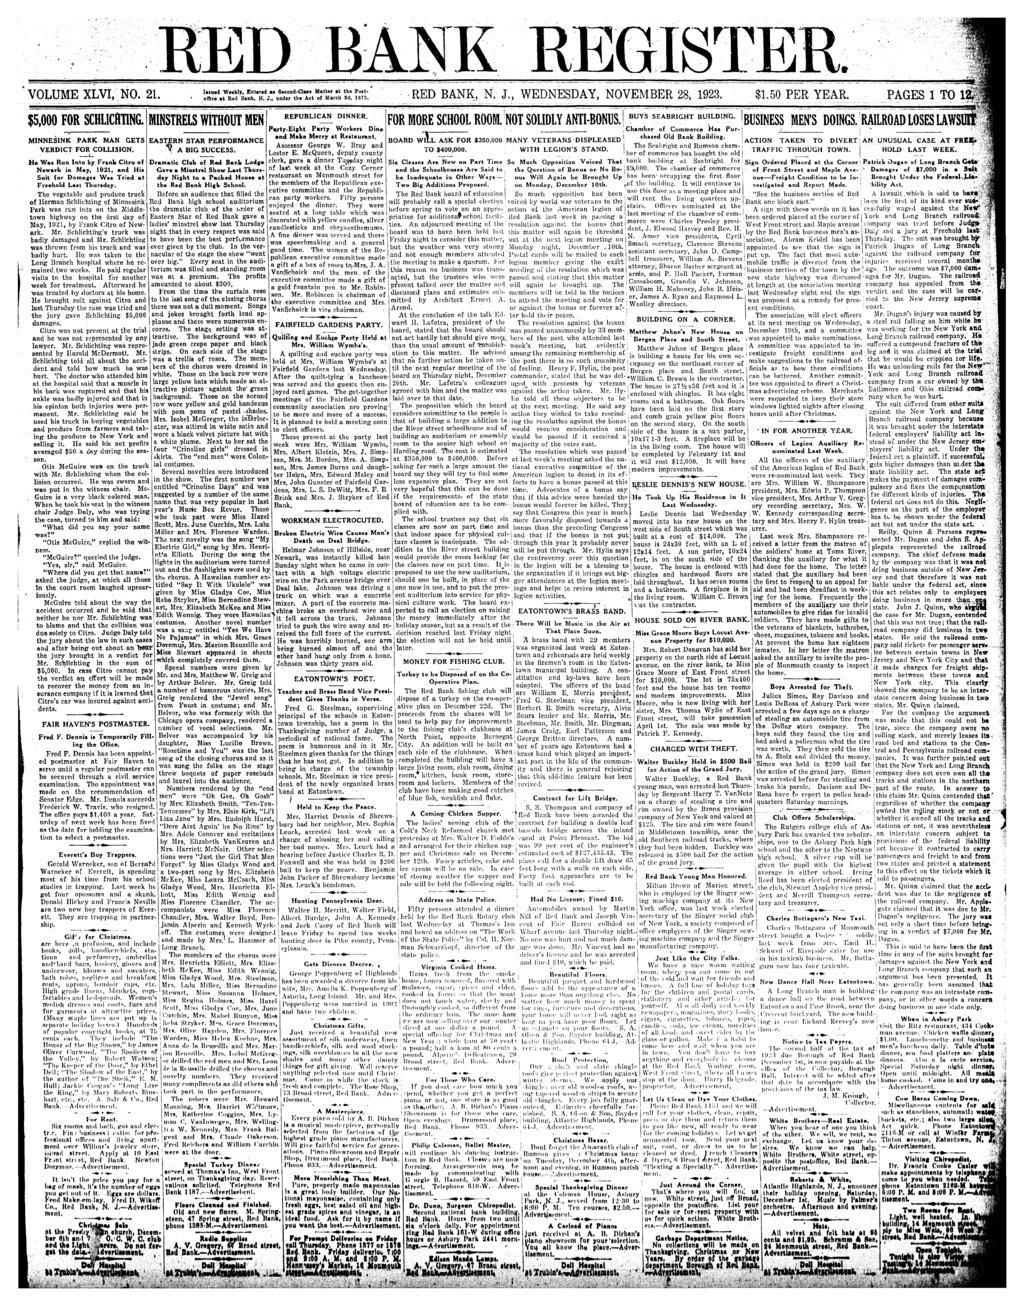 RED BANK REGSTER. VOLUME XLV, NO. 21. sasd Wekly, Enured as Bceond-ClM Malr a ho Po.. offlce > Red Bonk. N. J., under h«ac of March 3d, 1879. RED BANK, N. J., WEDNESDAY, NOVEMBER 28, 1923.